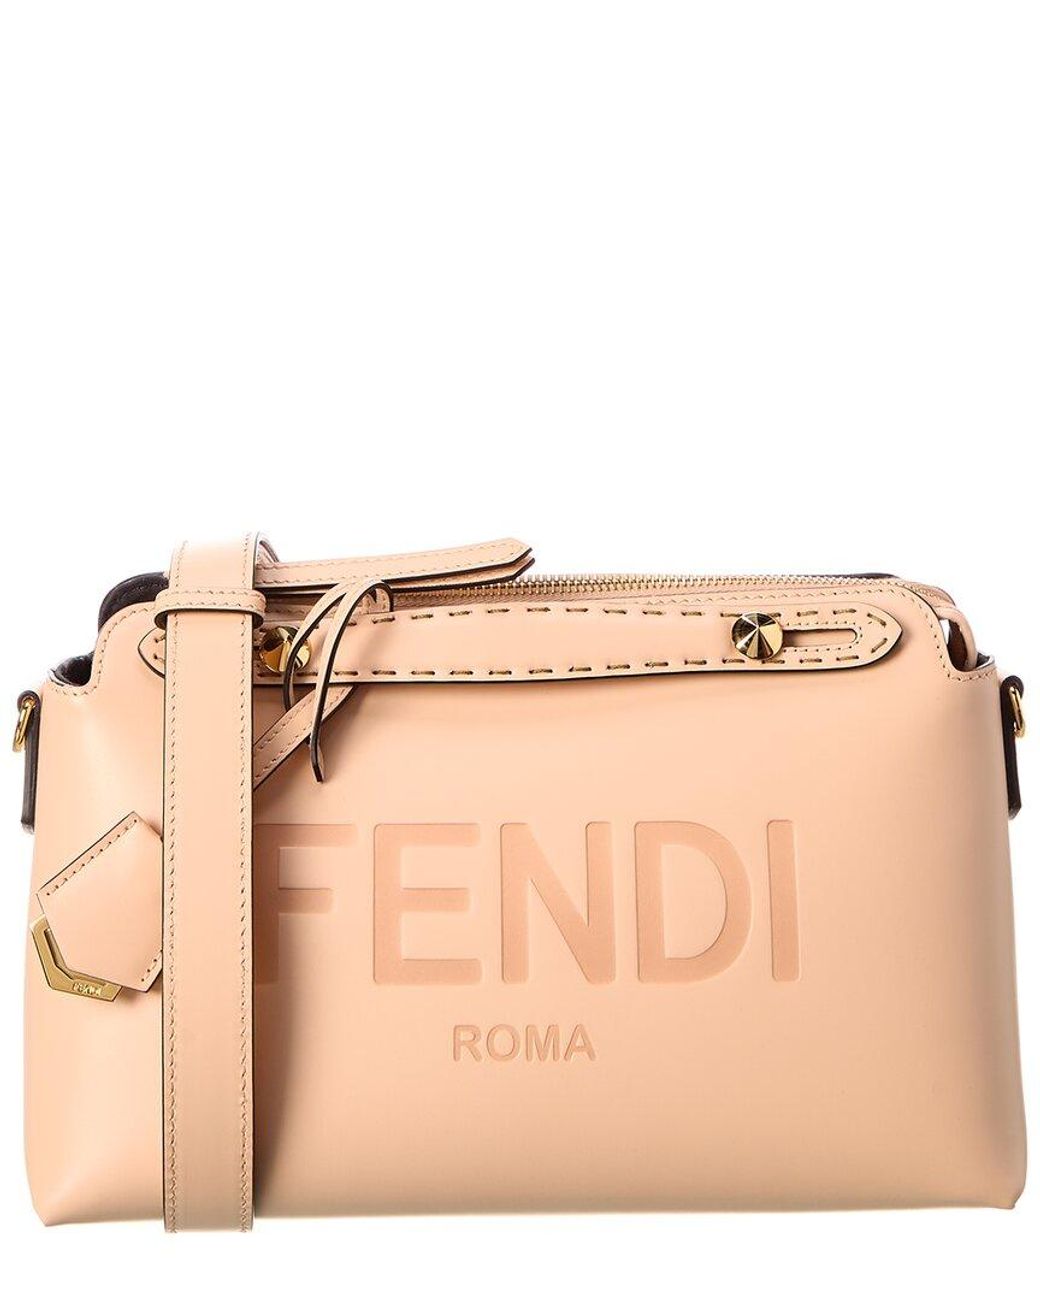 Fendi By The Way Medium Leather Shoulder Bag in Natural | Lyst